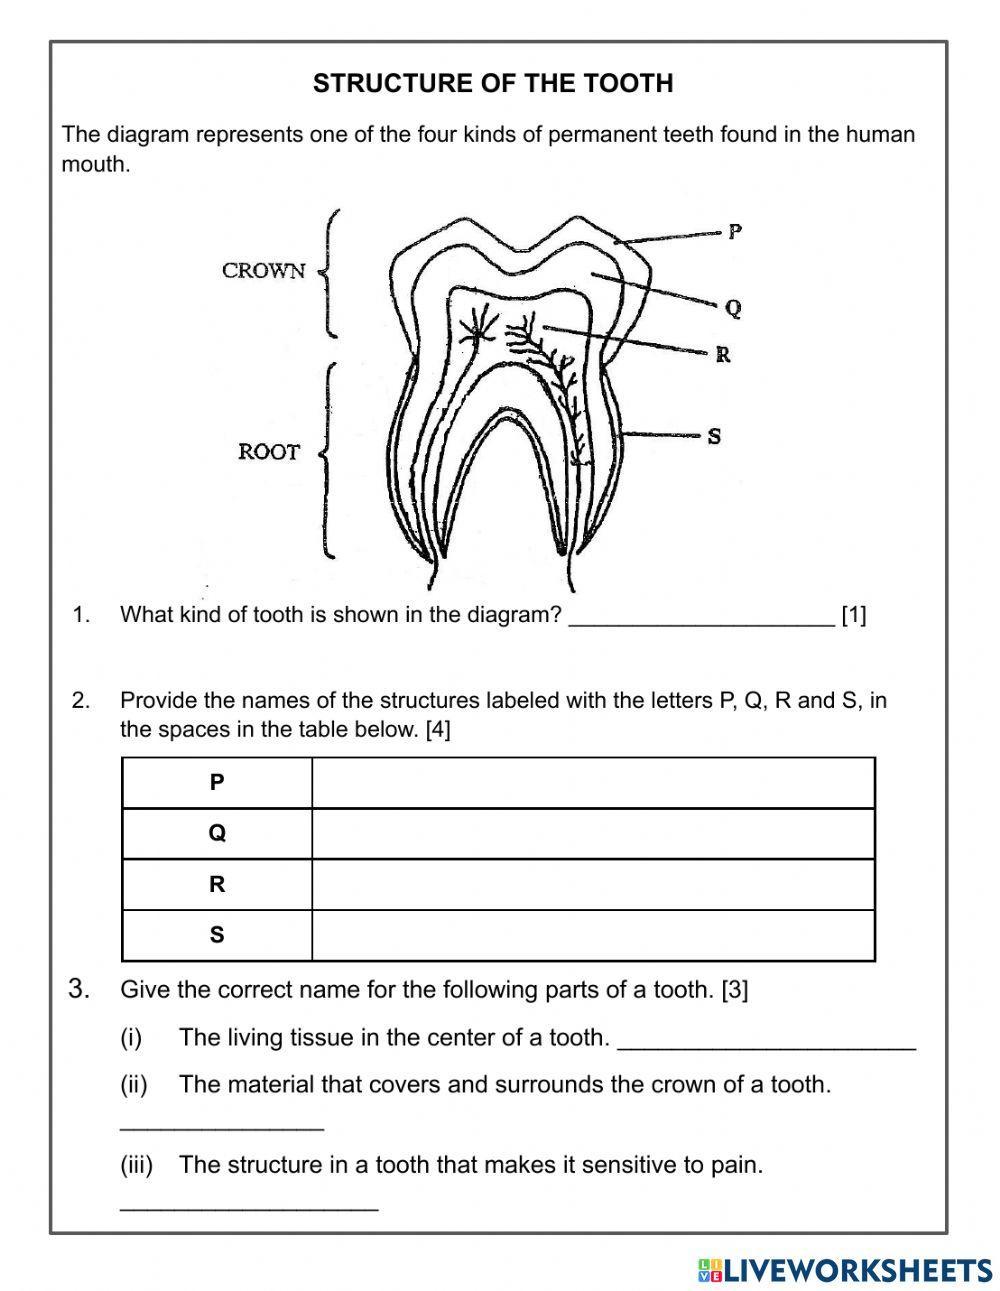 Structure of the Tooth